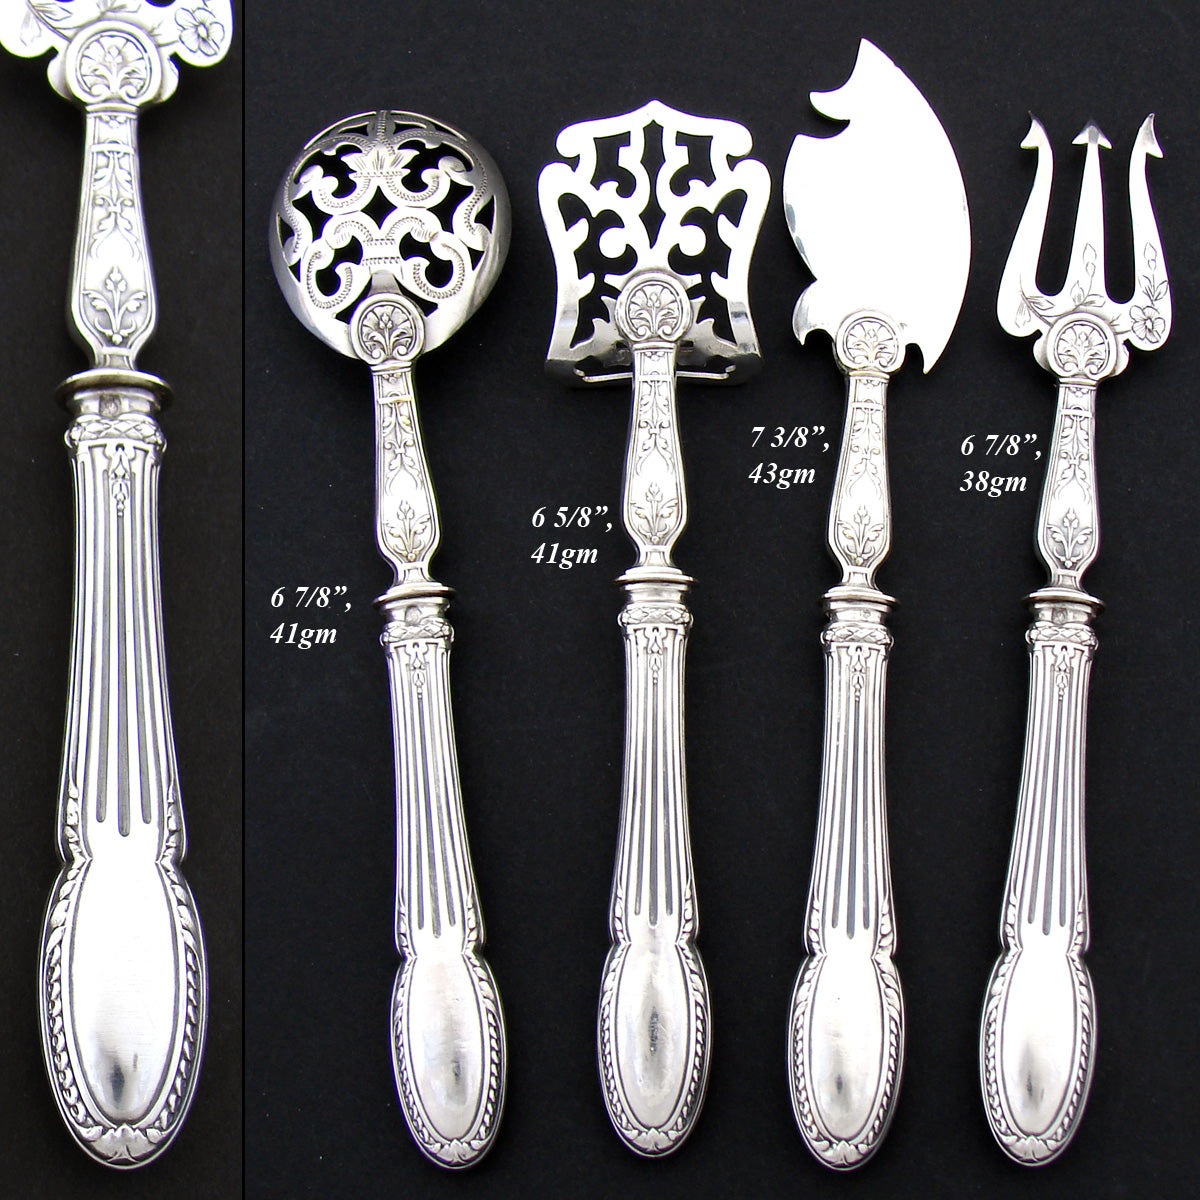 Antique French Sterling Silver 4p Hors d'Oeuvre Implement Set, Original Box